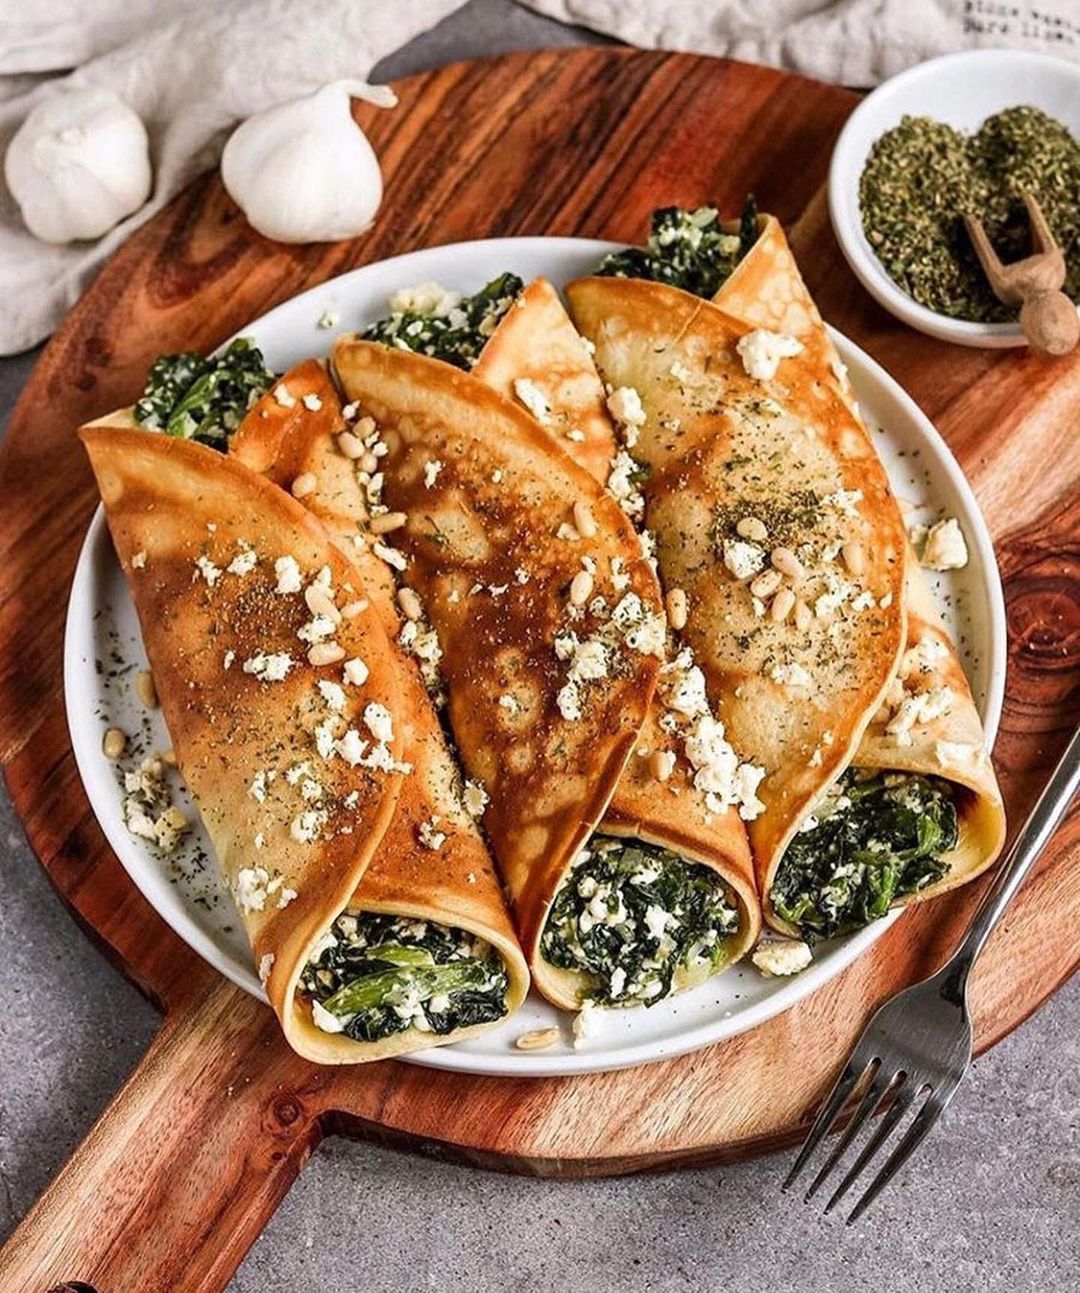 Vegan Oven-Baked Filled Crepes with Spinach and Feta